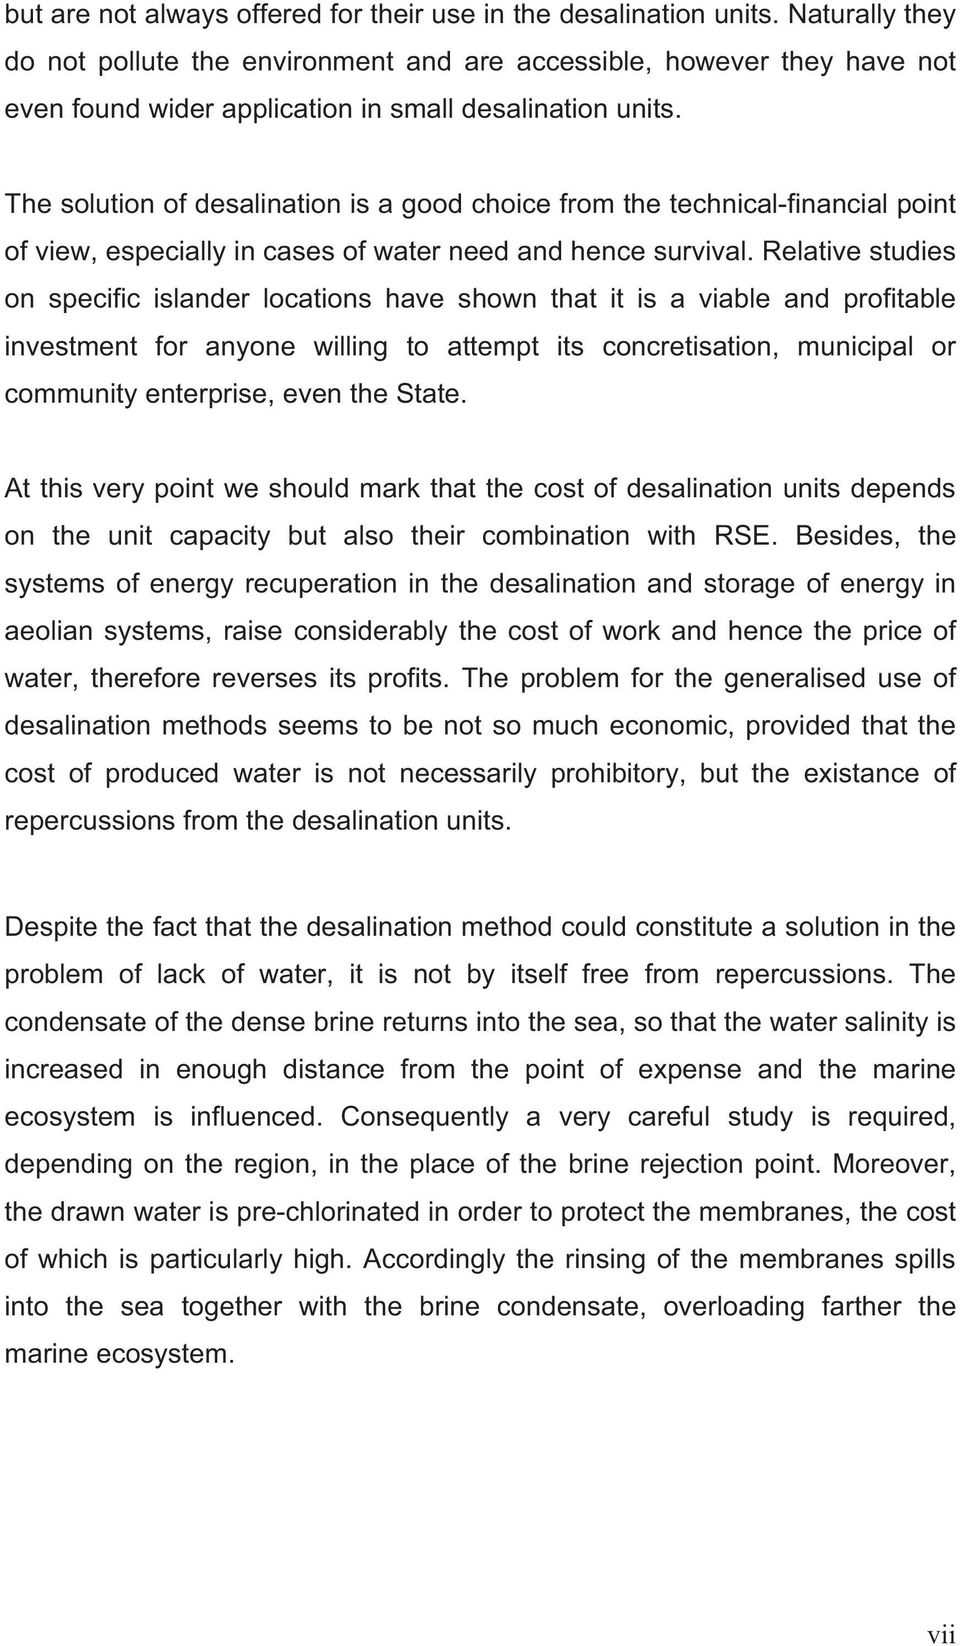 The solution of desalination is a good choice from the technical-financial point of view, especially in cases of water need and hence survival.